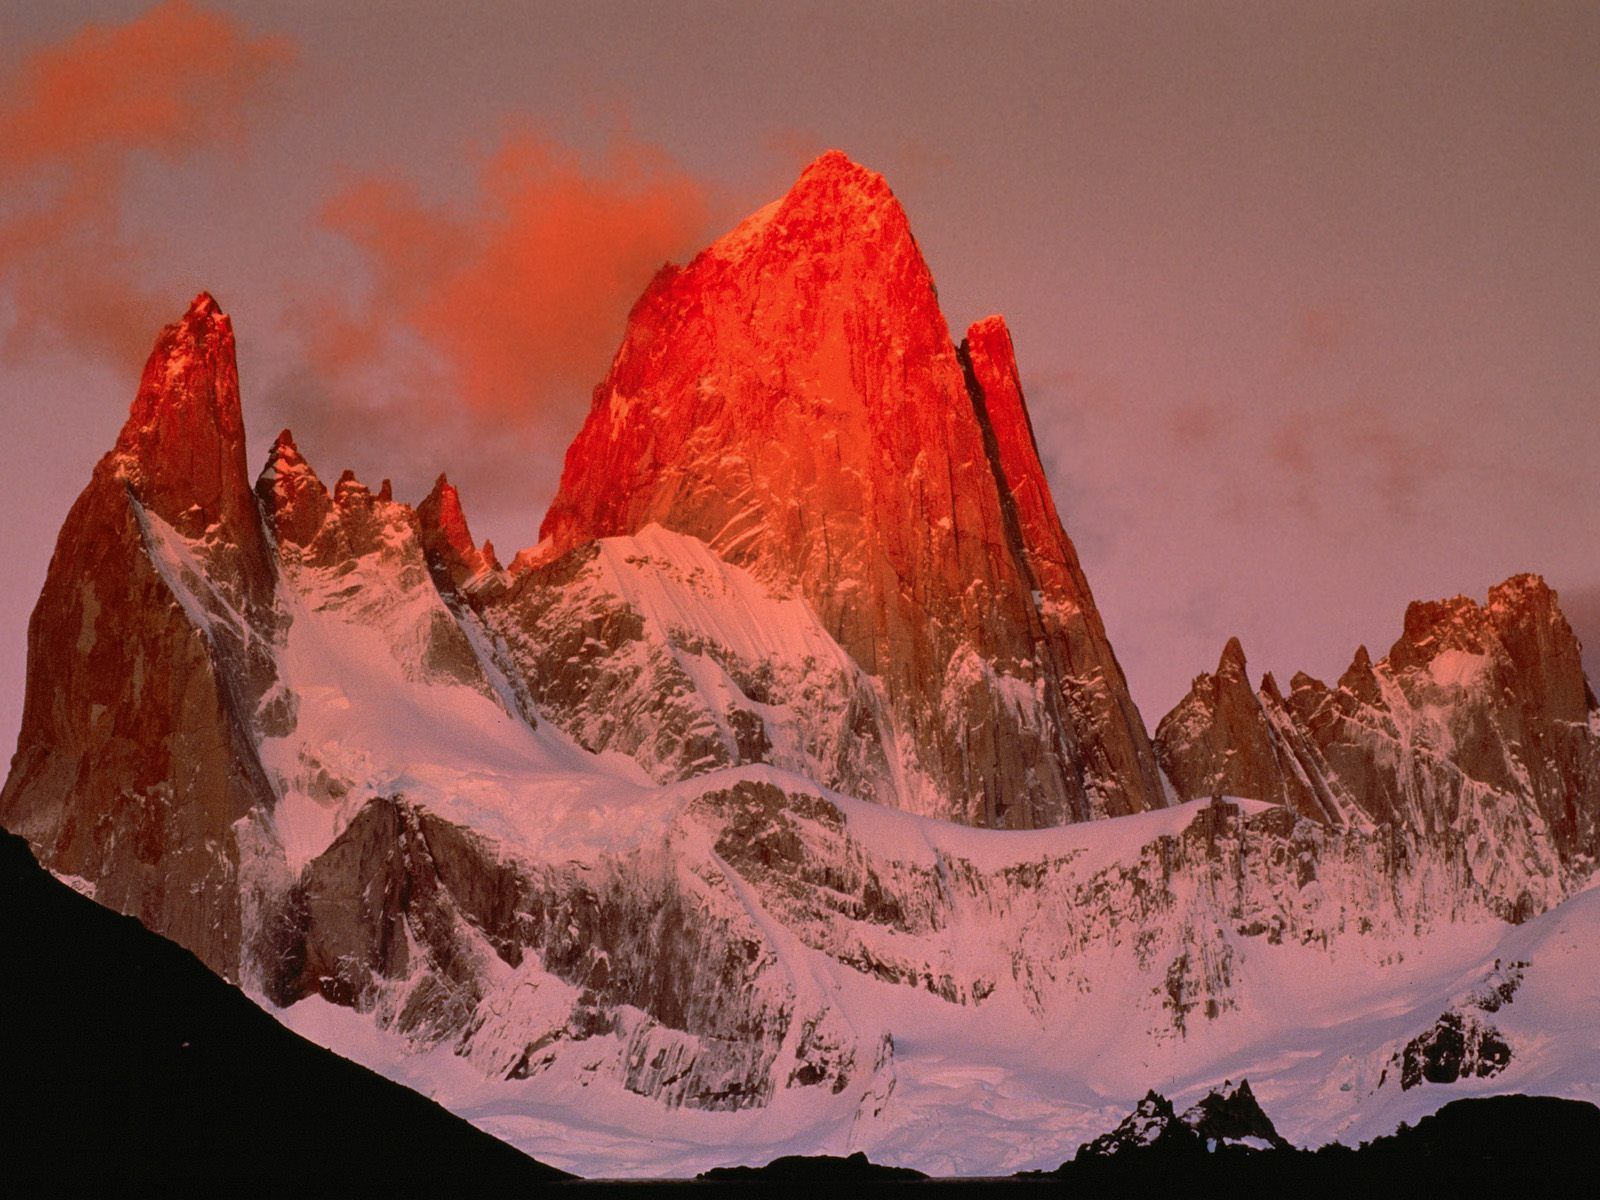 Popular Patagonia images for mobile phone